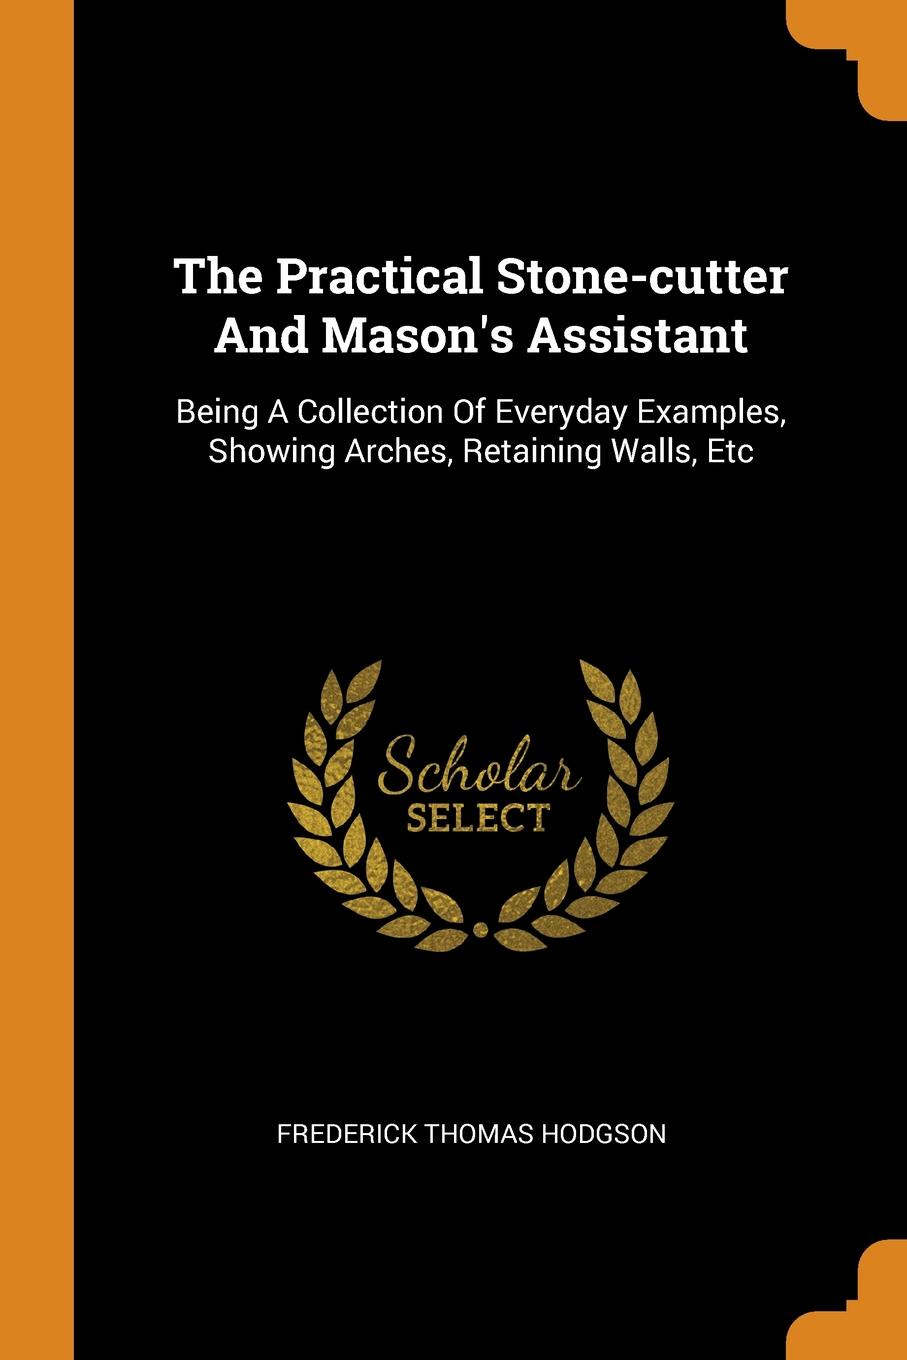 The Practical Stone-cutter And Mason.s Assistant. Being A Collection Of Everyday Examples, Showing Arches, Retaining Walls, Etc